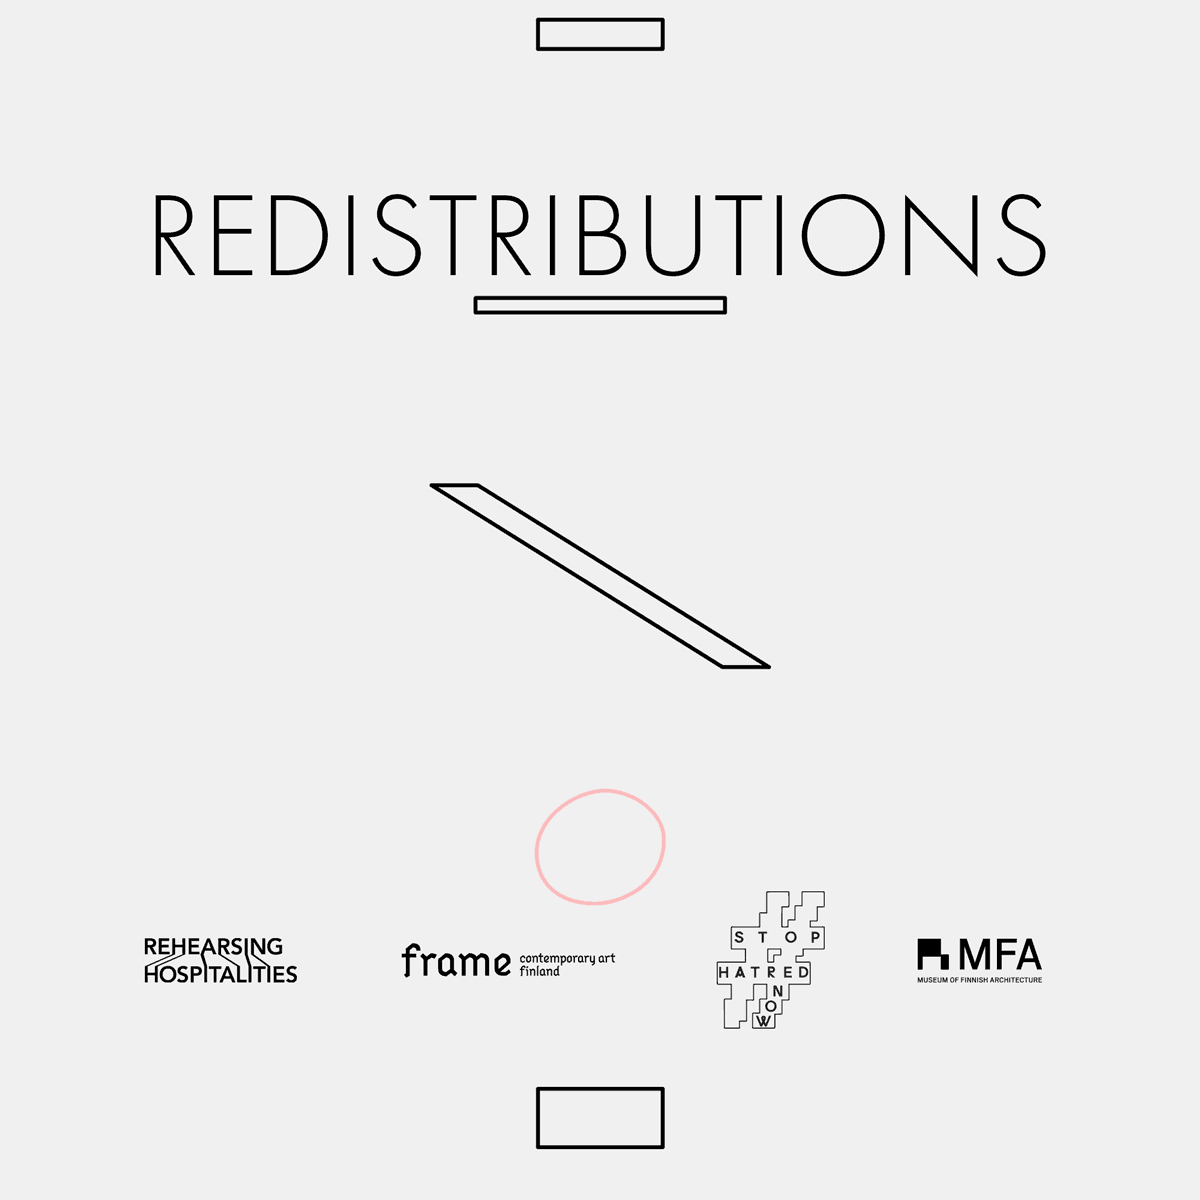 Animated gif image with the words Redistributions, and logos of Frame Contemporary Art Finland, StopHatredNow, and Museum of Finnish Architecture